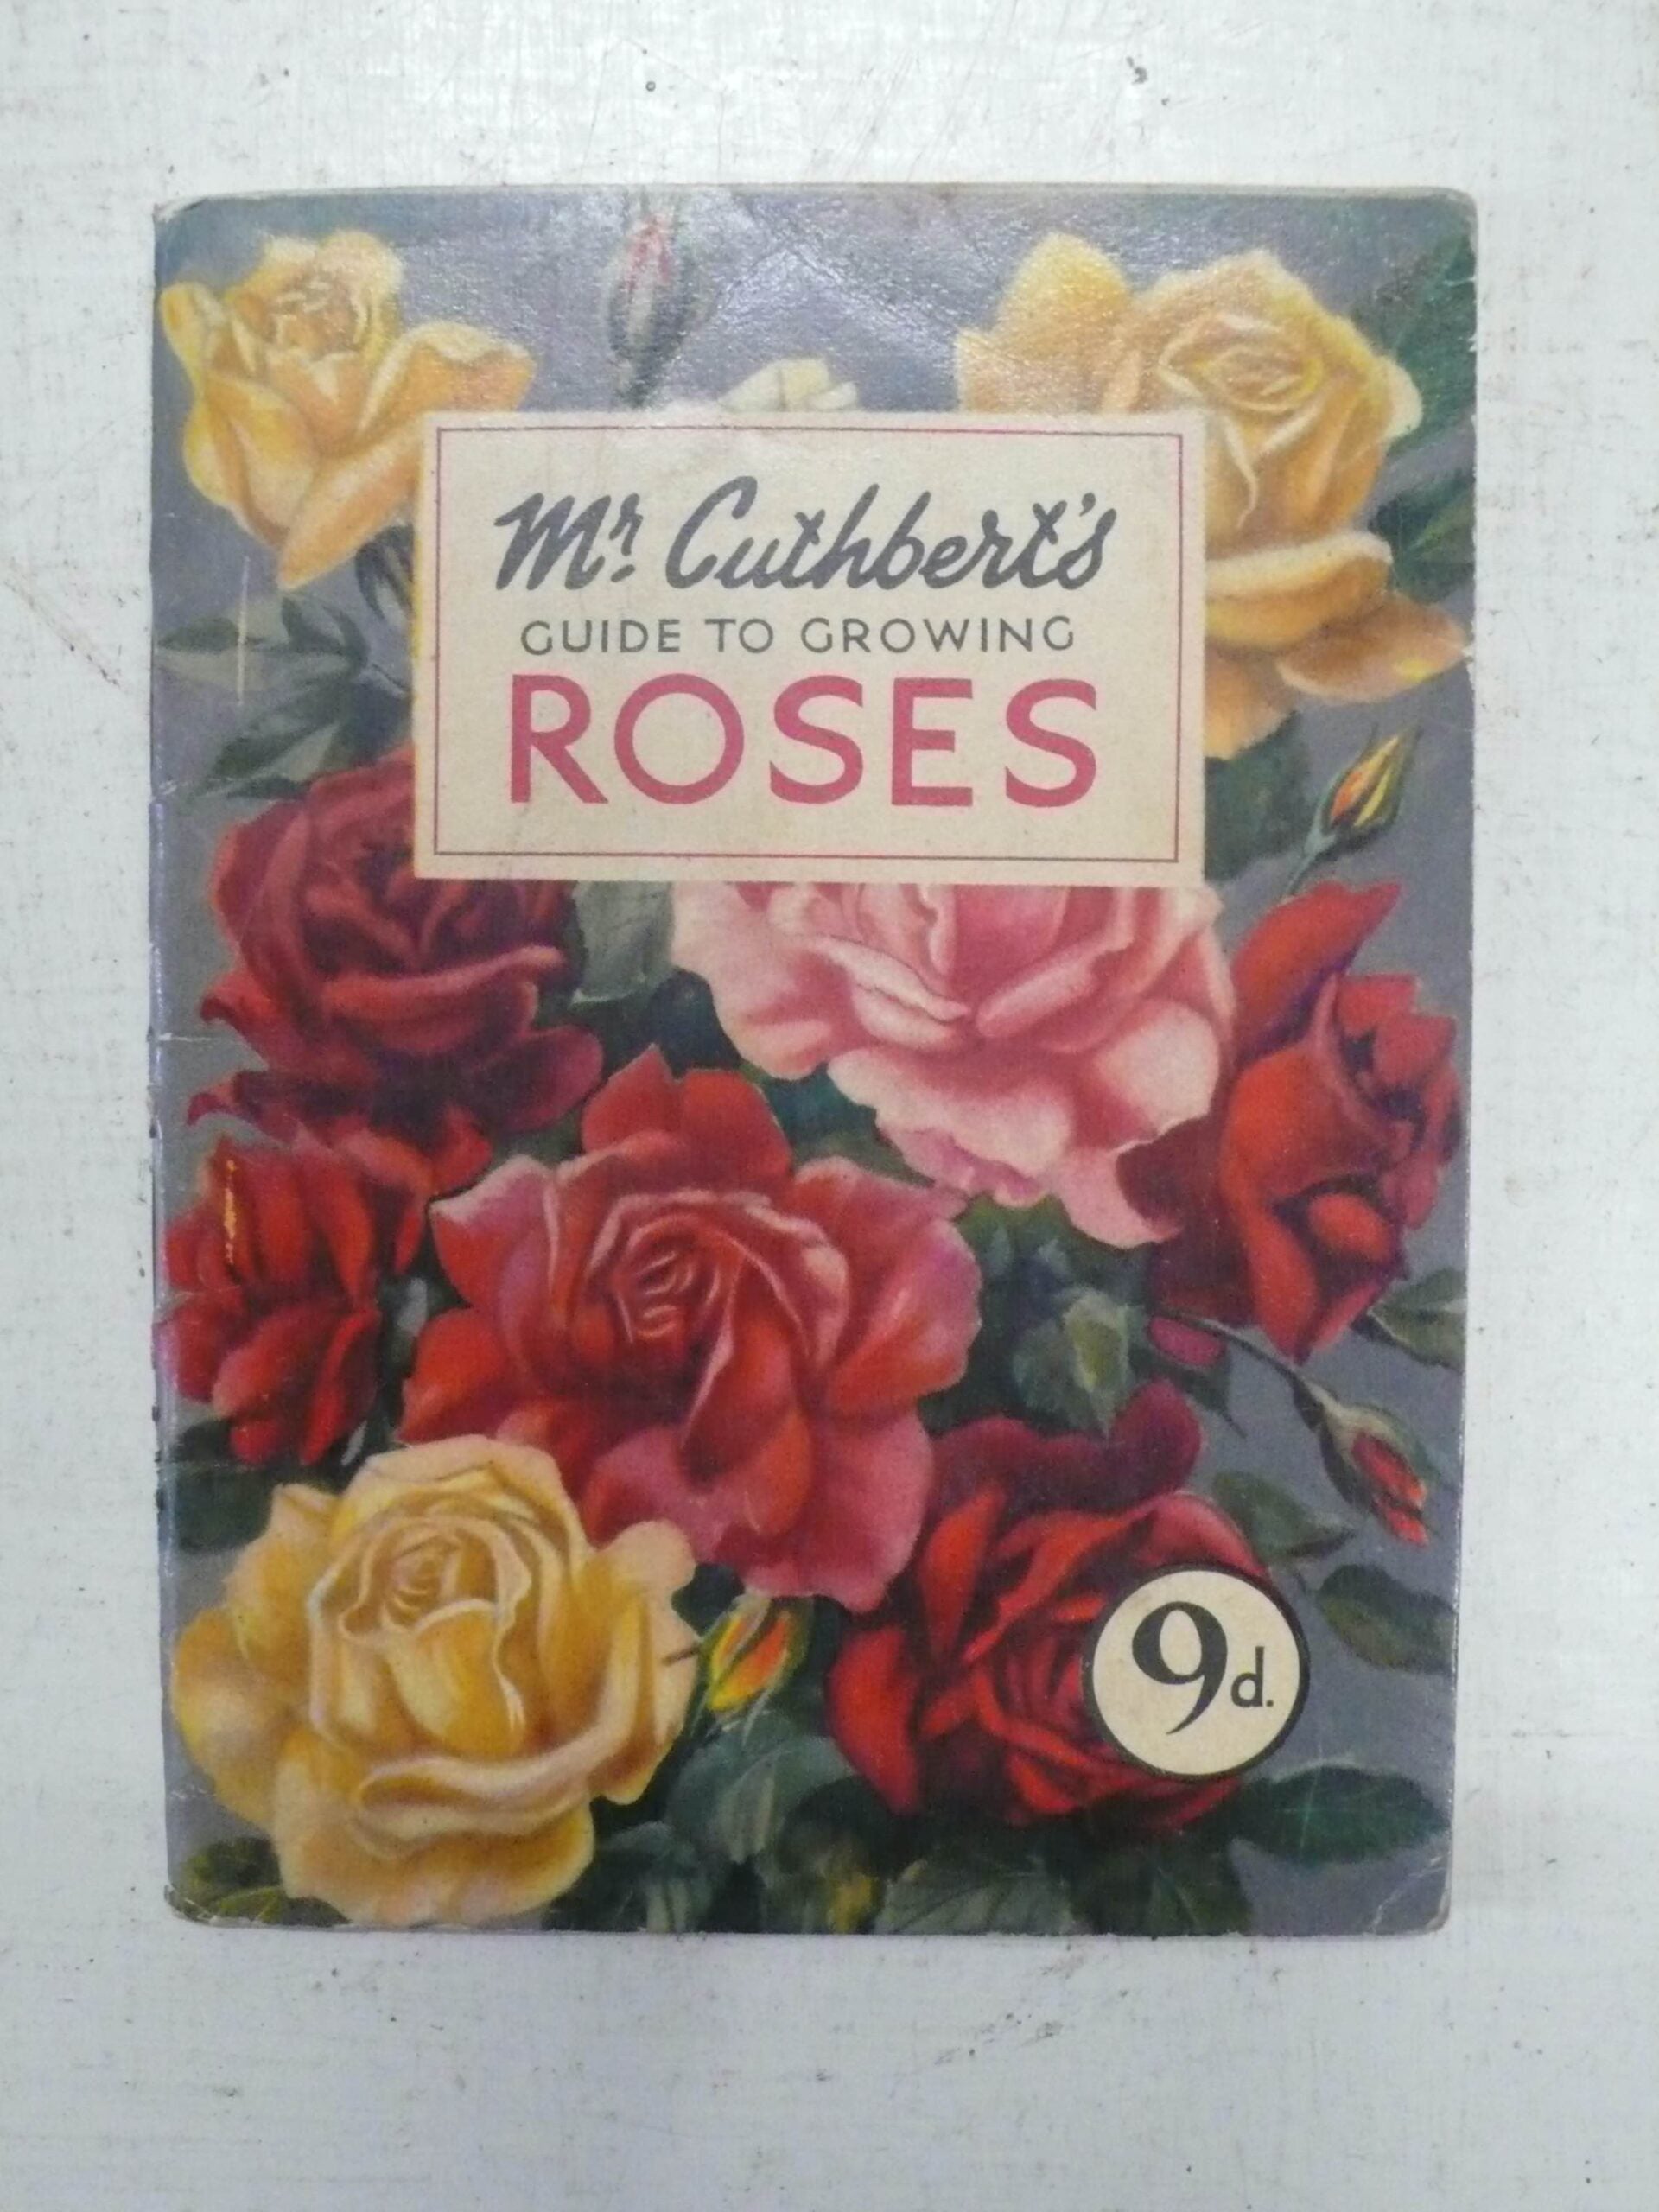 Mr Cuthberts Roses Guide